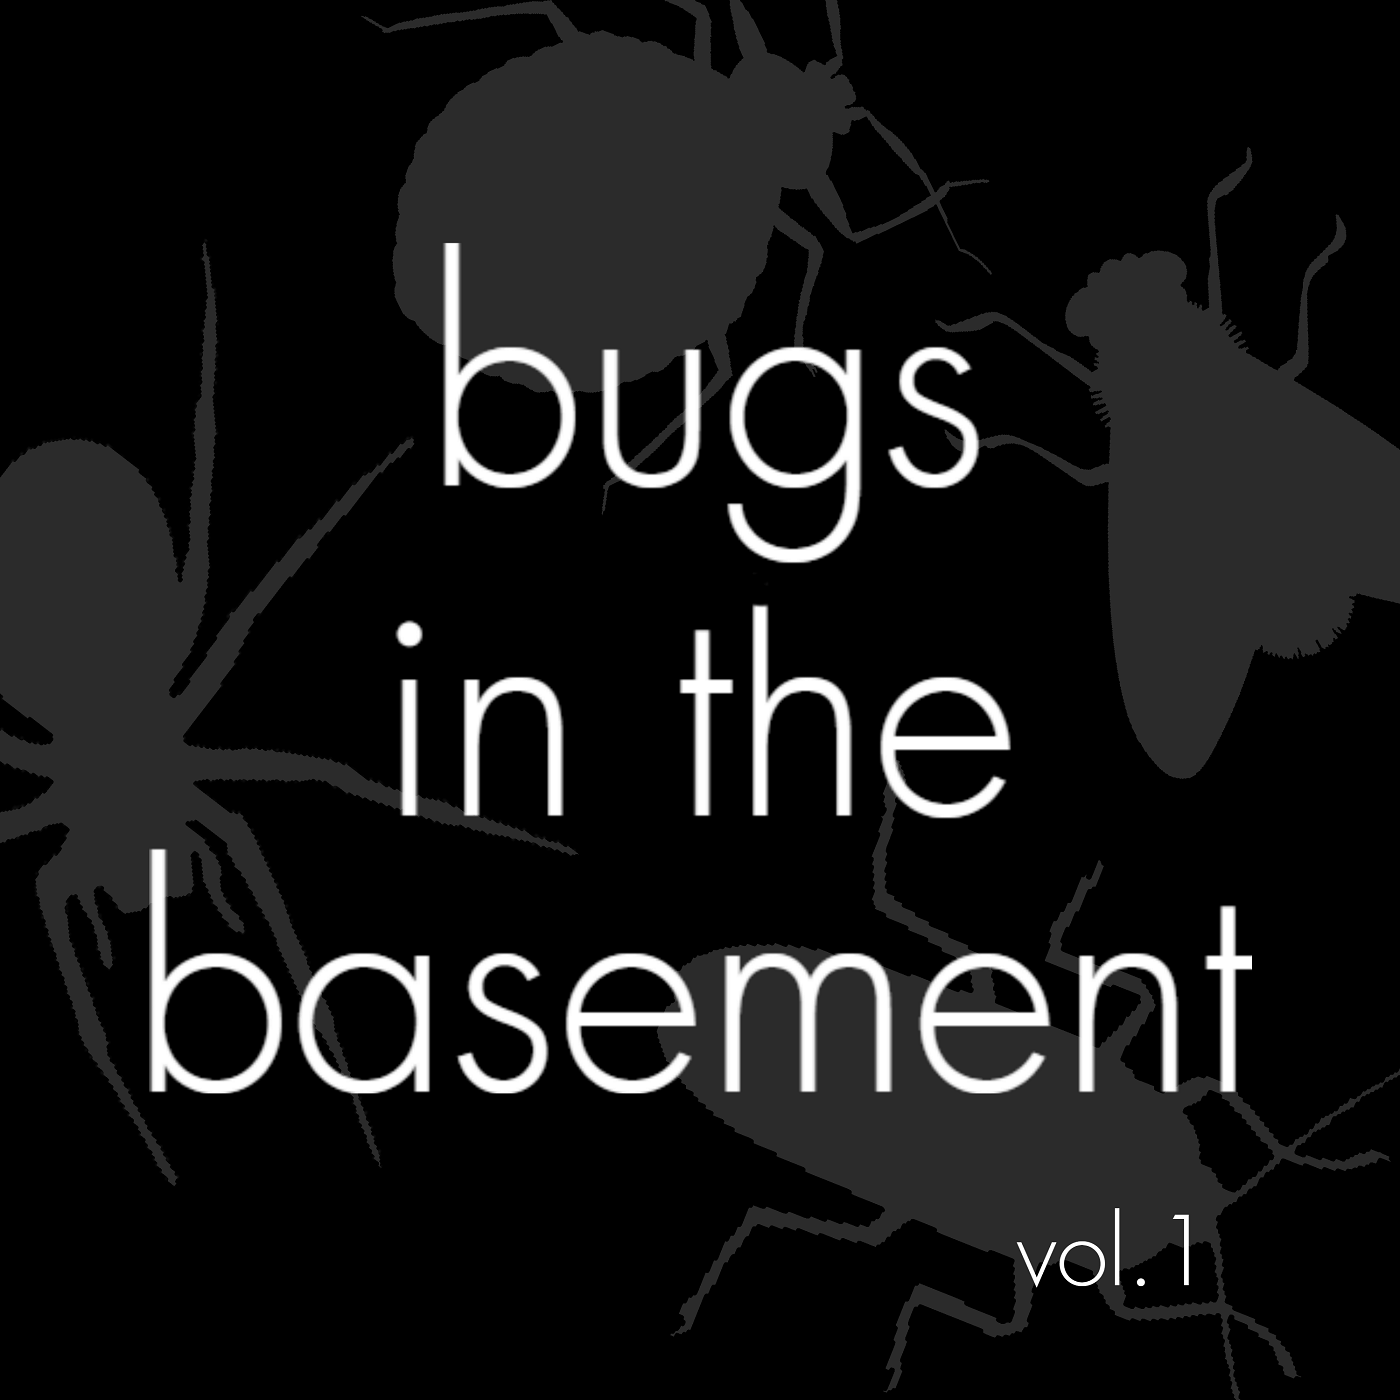 Bugs In The Basement: Vol. 1